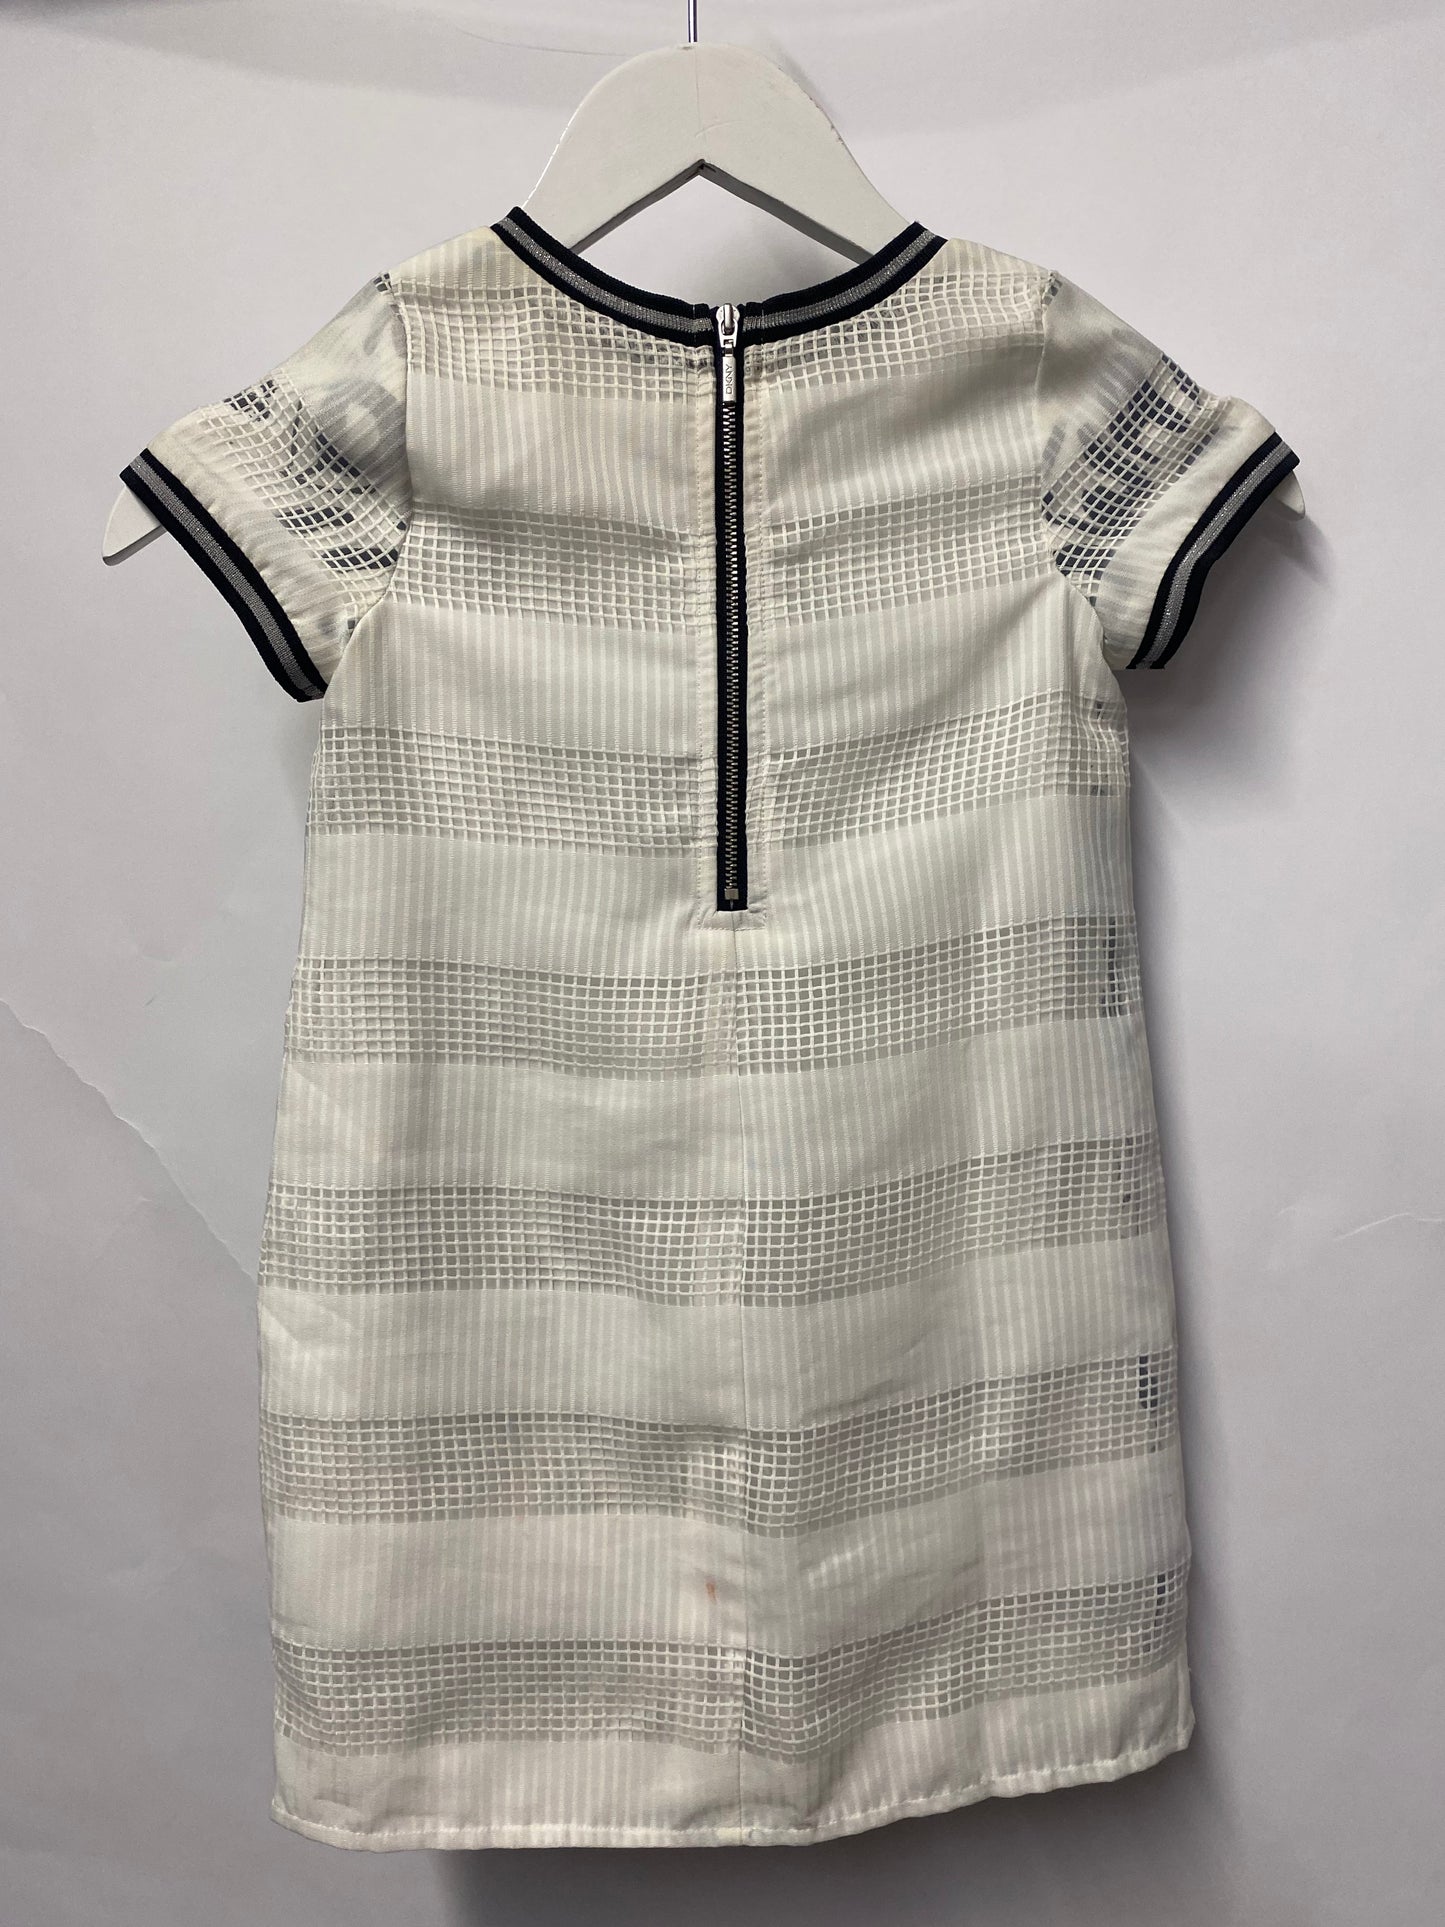 DKNY Kids Black and White Monochrome T-shirt Style Dress 5 years